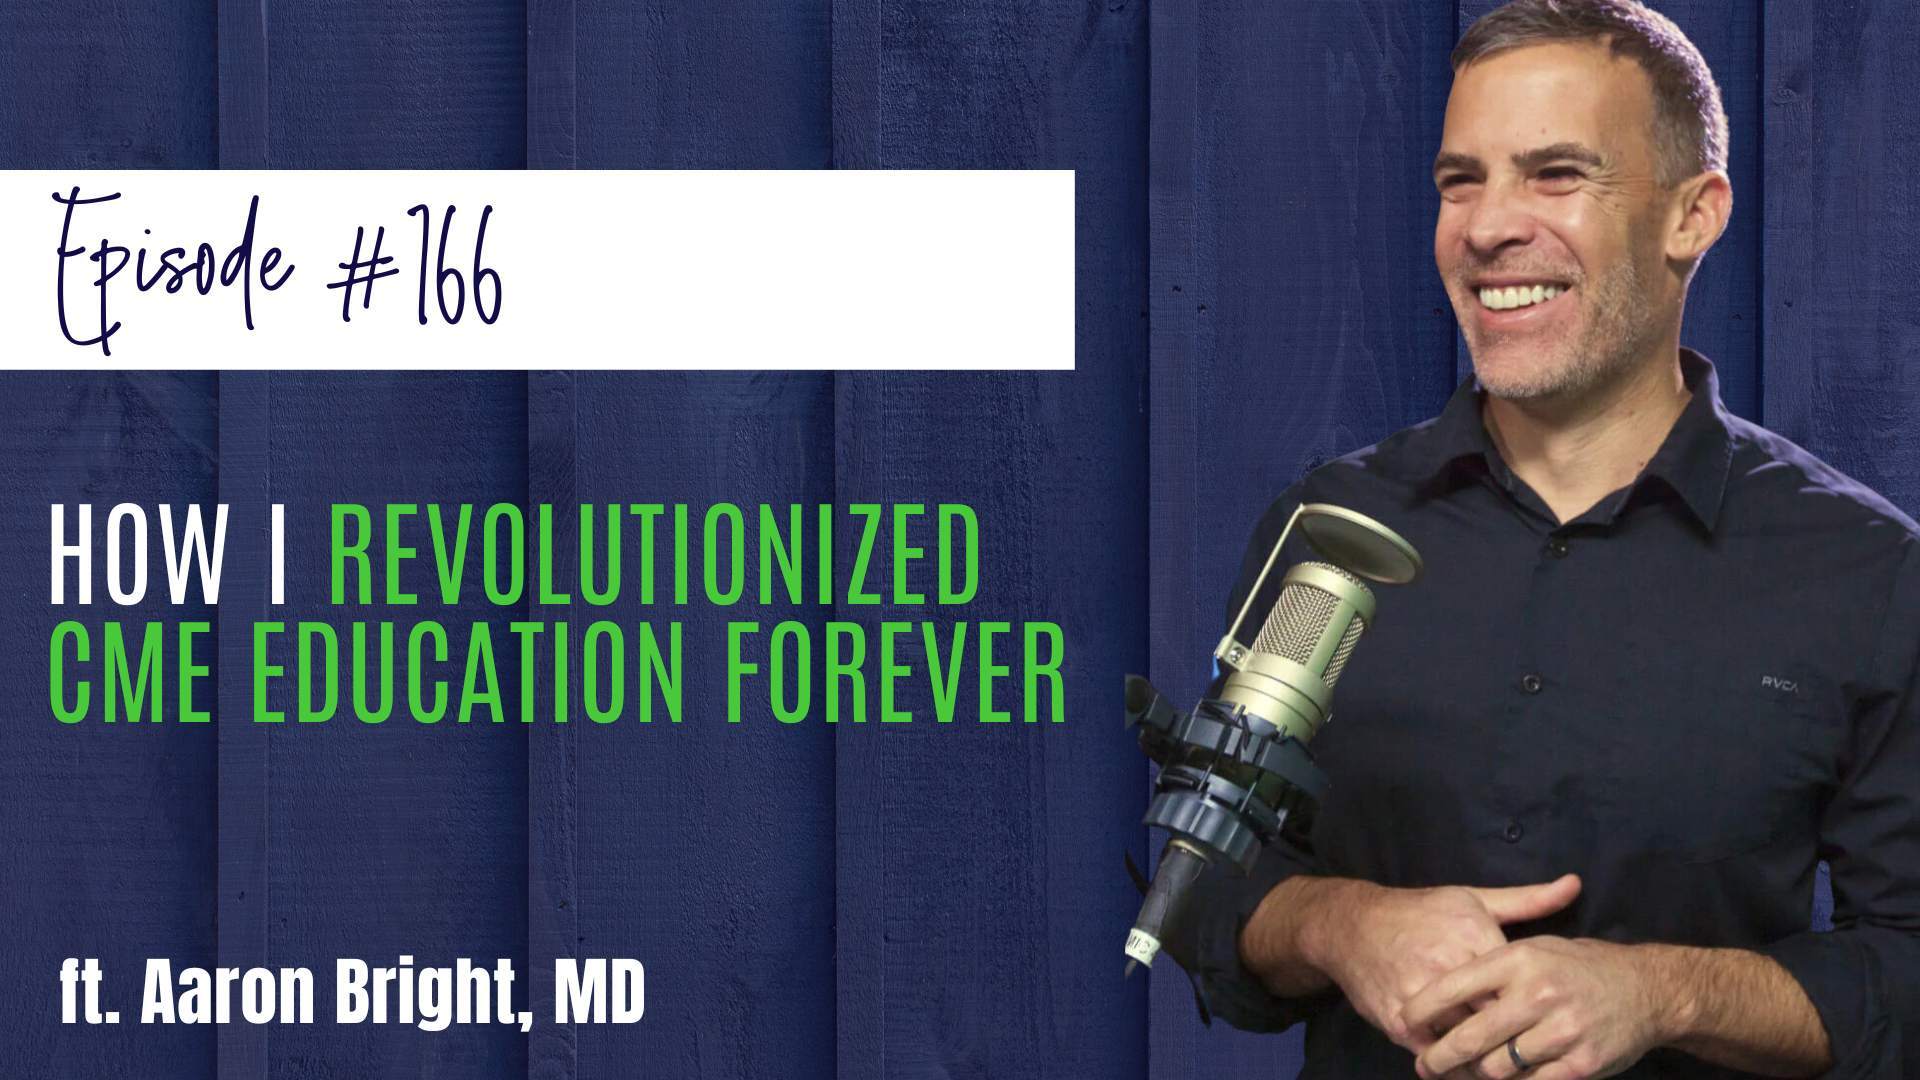 #166 How I Revolutionized CME Education Forever, ft. Aaron Bright, MD